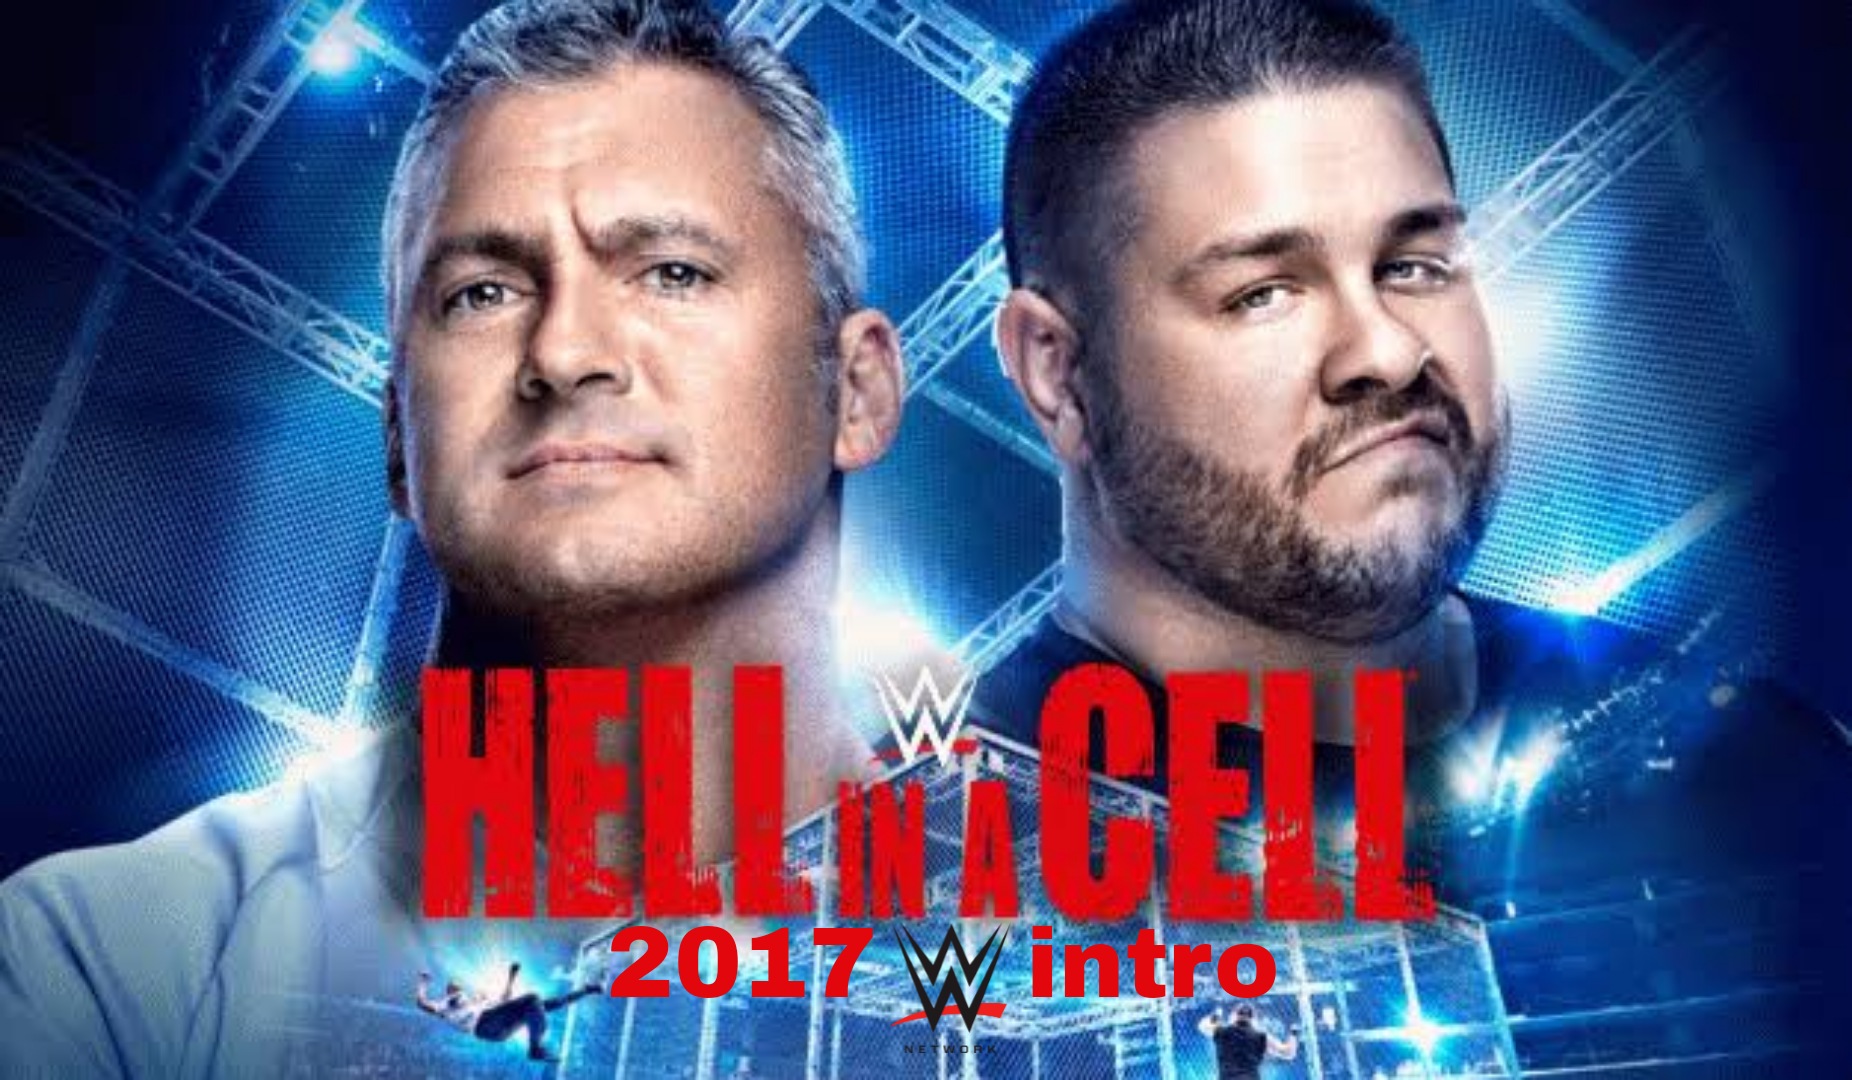 WWE Hell in a Cell 2017 WWE Network intro